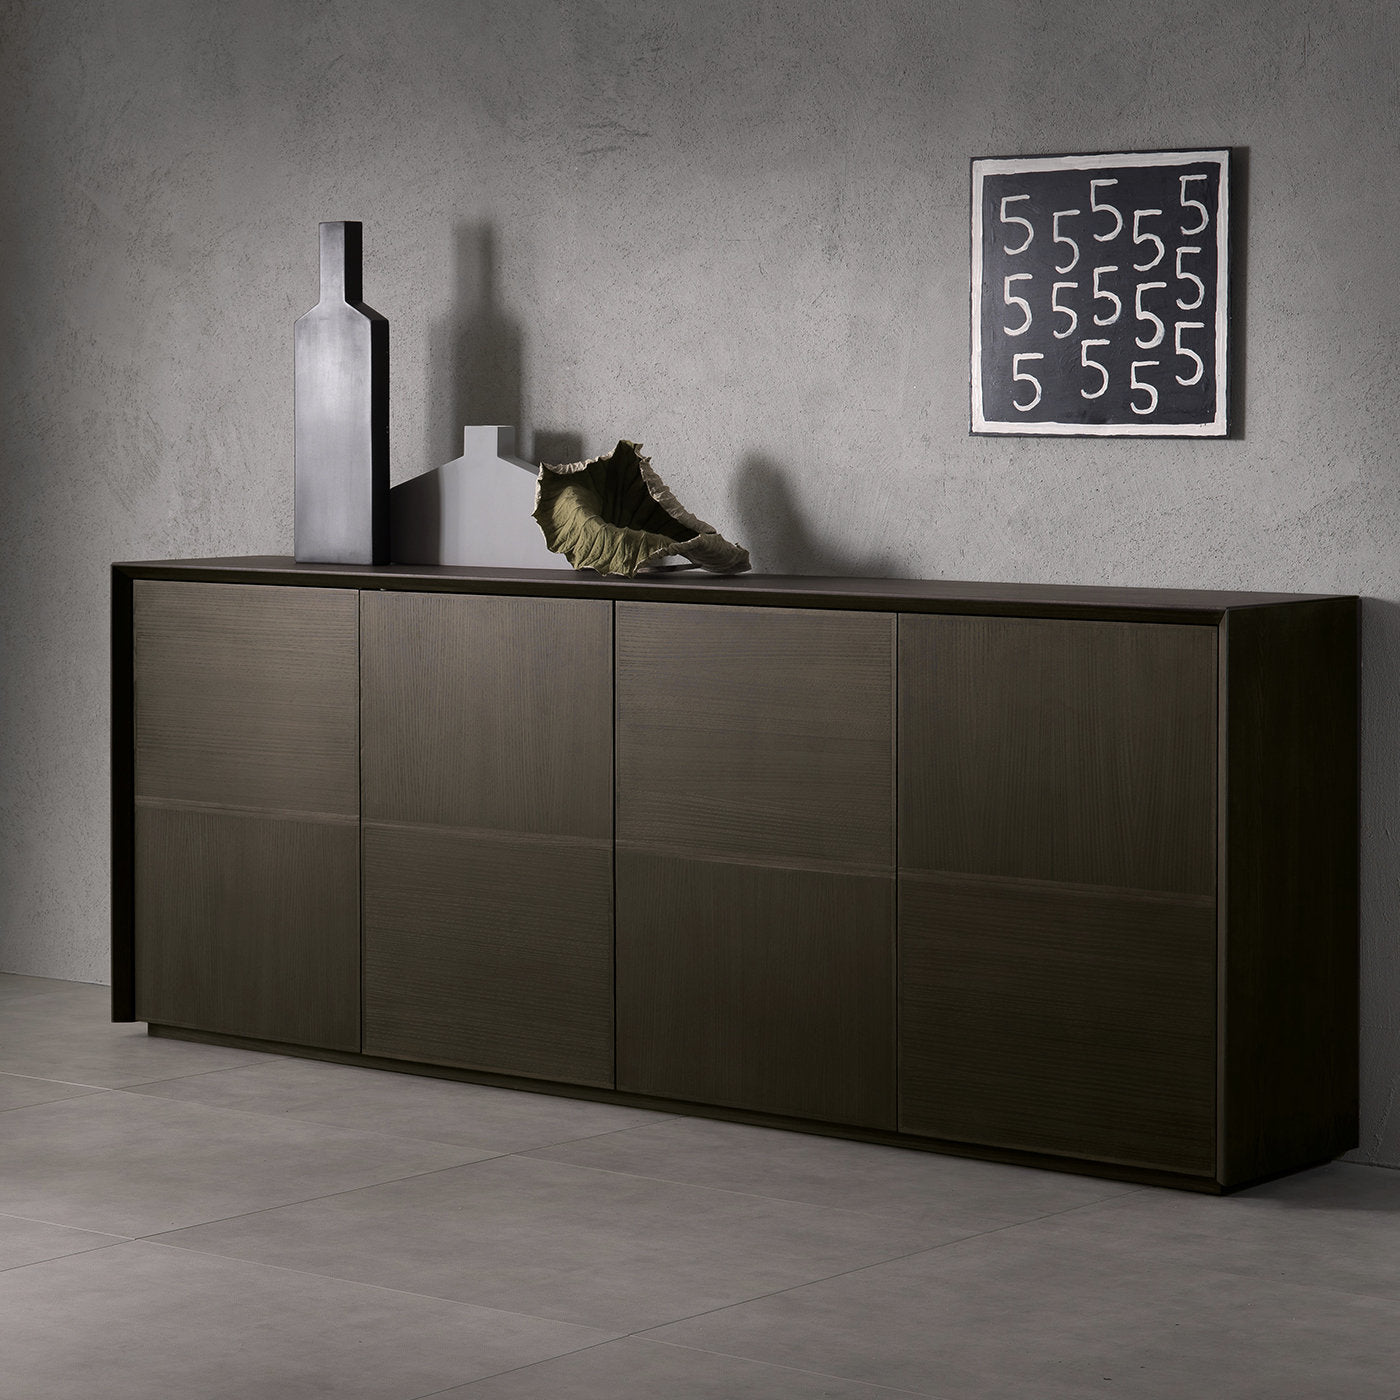 Flair Sideboard by Giuliano Cappelletti - Alternative view 1